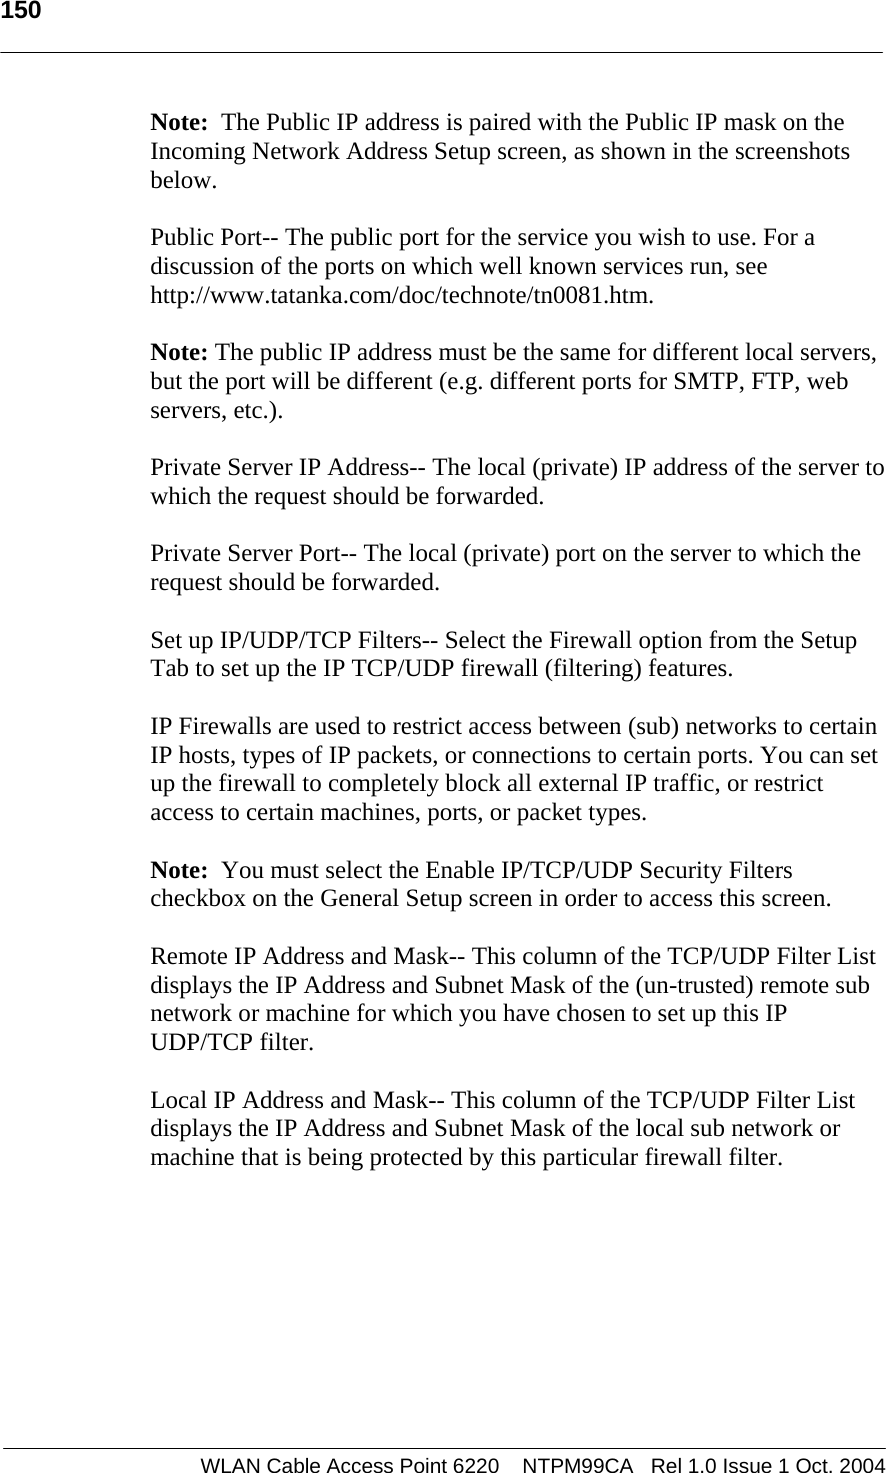   150   Note:  The Public IP address is paired with the Public IP mask on the Incoming Network Address Setup screen, as shown in the screenshots below.  Public Port-- The public port for the service you wish to use. For a discussion of the ports on which well known services run, see http://www.tatanka.com/doc/technote/tn0081.htm.  Note: The public IP address must be the same for different local servers, but the port will be different (e.g. different ports for SMTP, FTP, web servers, etc.).  Private Server IP Address-- The local (private) IP address of the server to which the request should be forwarded.  Private Server Port-- The local (private) port on the server to which the request should be forwarded.  Set up IP/UDP/TCP Filters-- Select the Firewall option from the Setup Tab to set up the IP TCP/UDP firewall (filtering) features.  IP Firewalls are used to restrict access between (sub) networks to certain IP hosts, types of IP packets, or connections to certain ports. You can set up the firewall to completely block all external IP traffic, or restrict access to certain machines, ports, or packet types.   Note:  You must select the Enable IP/TCP/UDP Security Filters checkbox on the General Setup screen in order to access this screen.  Remote IP Address and Mask-- This column of the TCP/UDP Filter List displays the IP Address and Subnet Mask of the (un-trusted) remote sub network or machine for which you have chosen to set up this IP UDP/TCP filter.  Local IP Address and Mask-- This column of the TCP/UDP Filter List displays the IP Address and Subnet Mask of the local sub network or machine that is being protected by this particular firewall filter.  WLAN Cable Access Point 6220    NTPM99CA   Rel 1.0 Issue 1 Oct. 2004